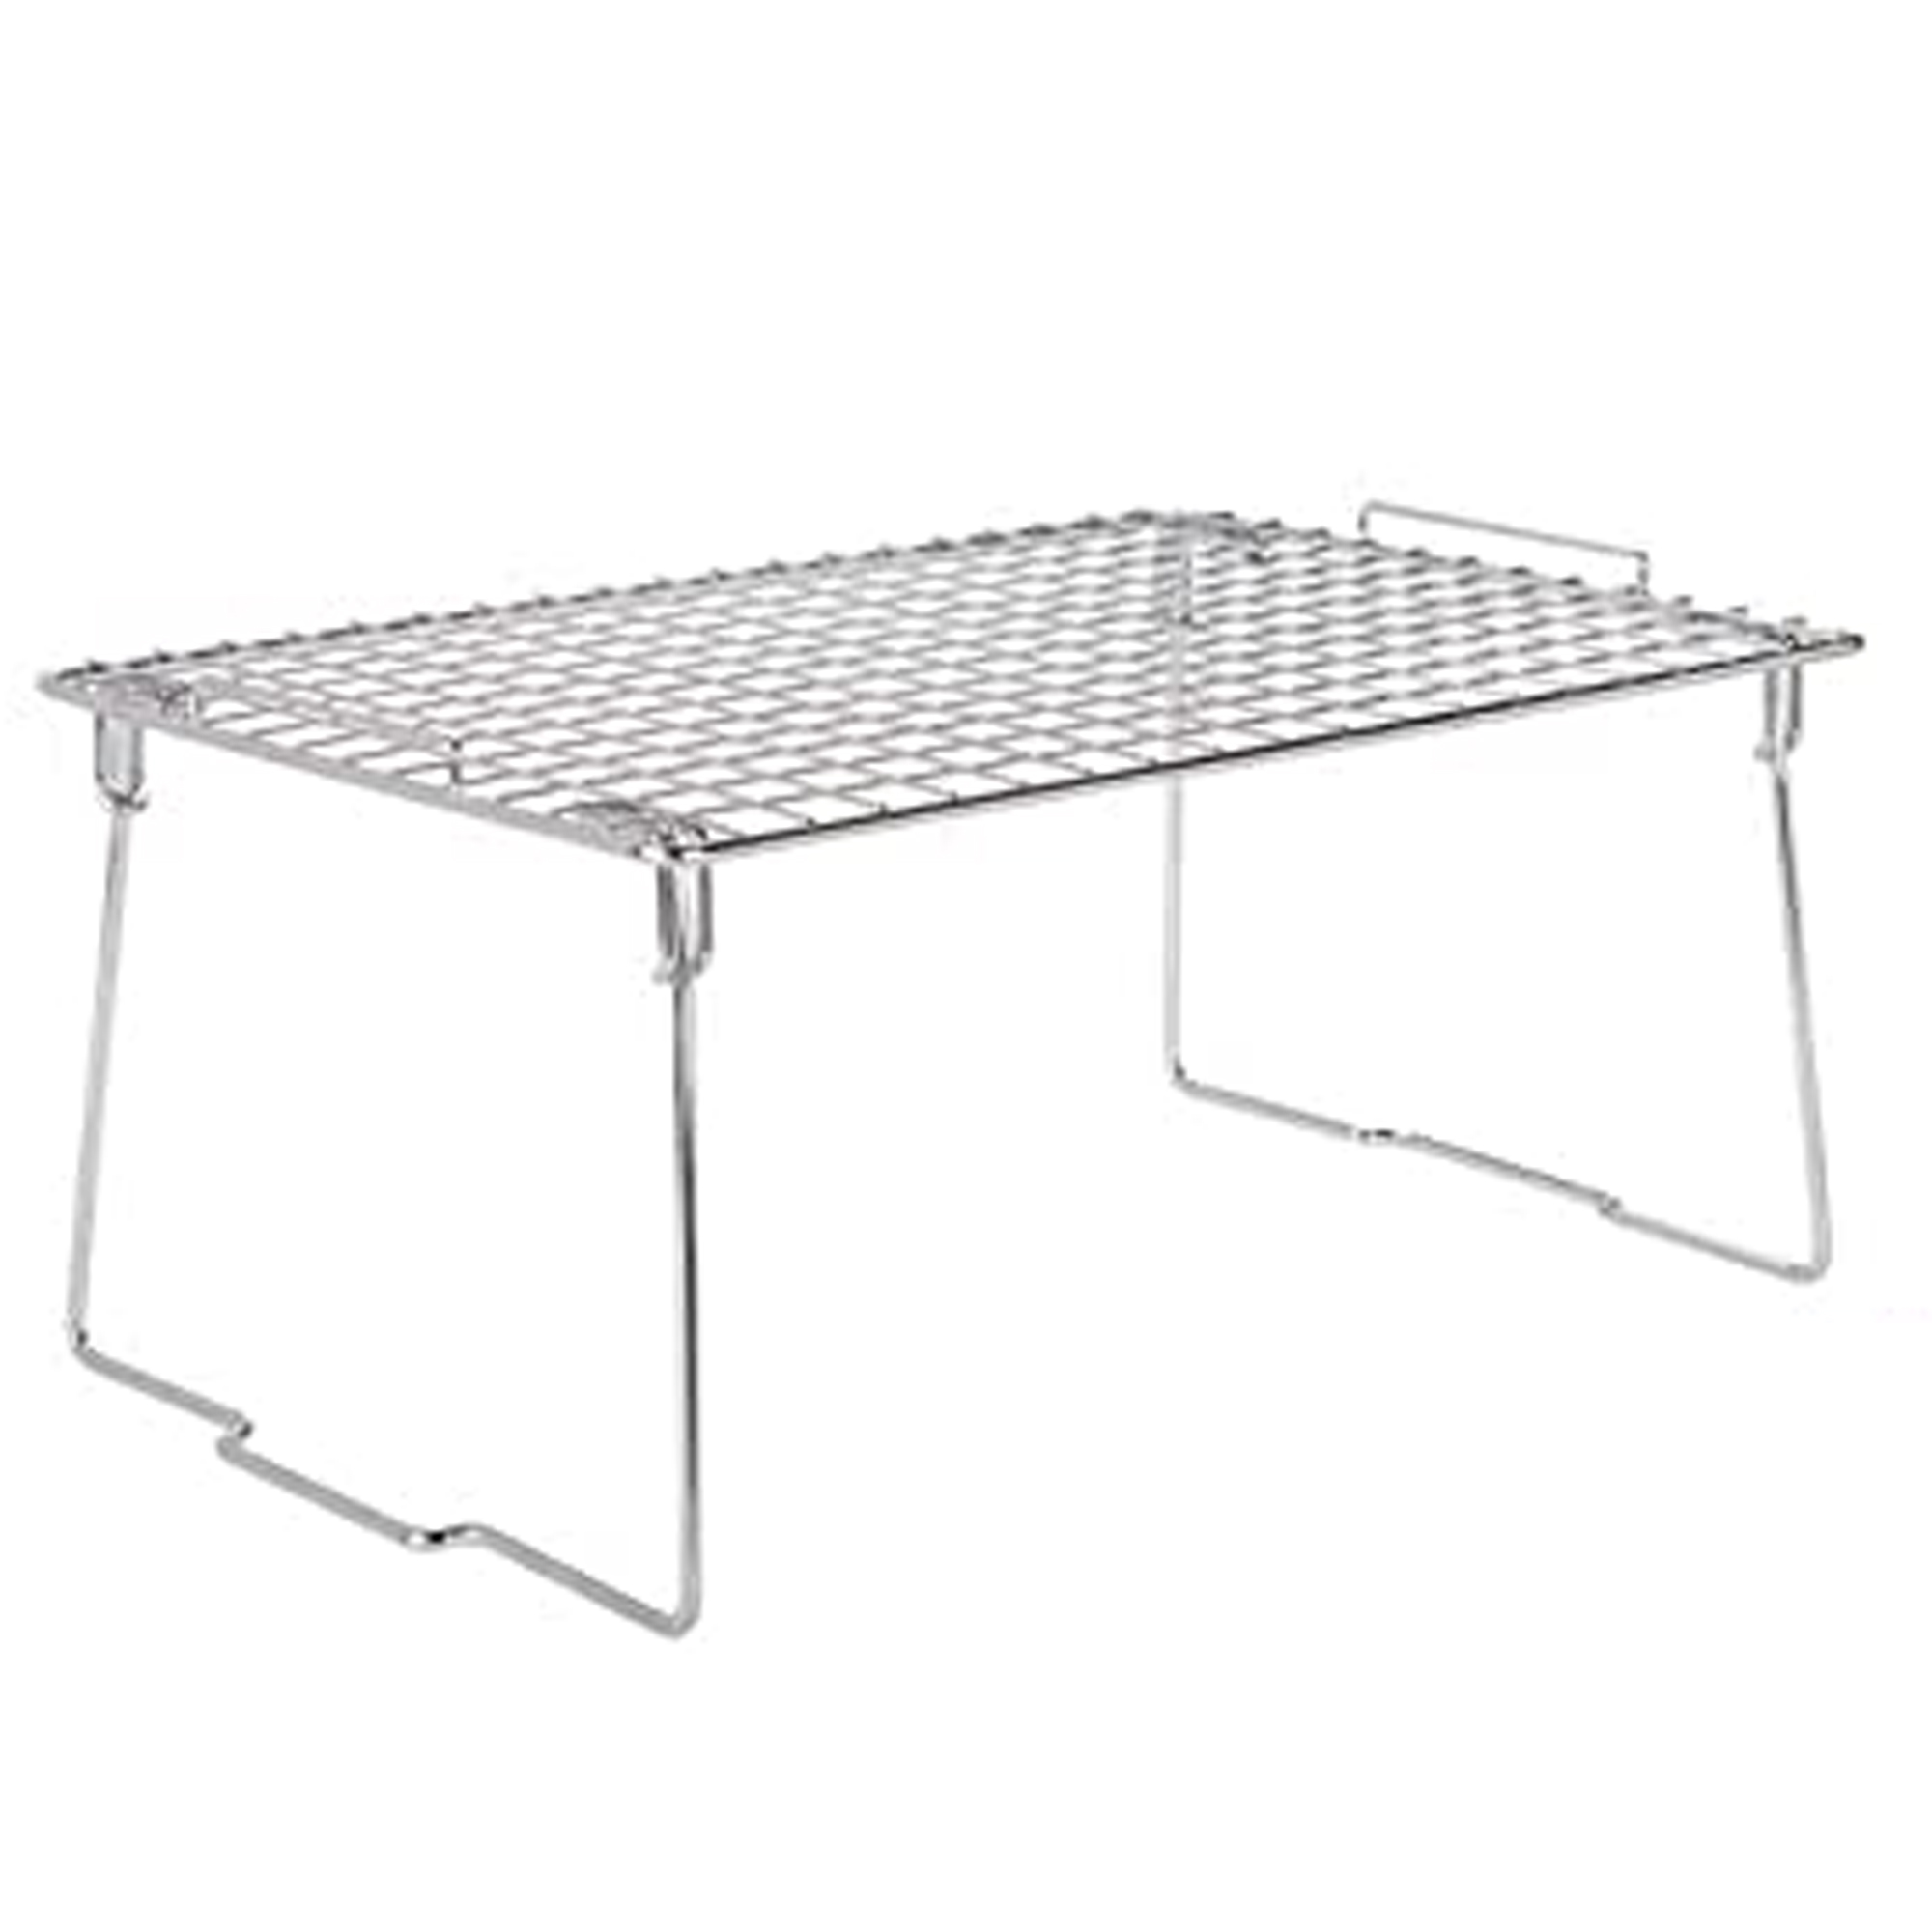 Set of 2 metal wire racks for kitchen and cabinet organization